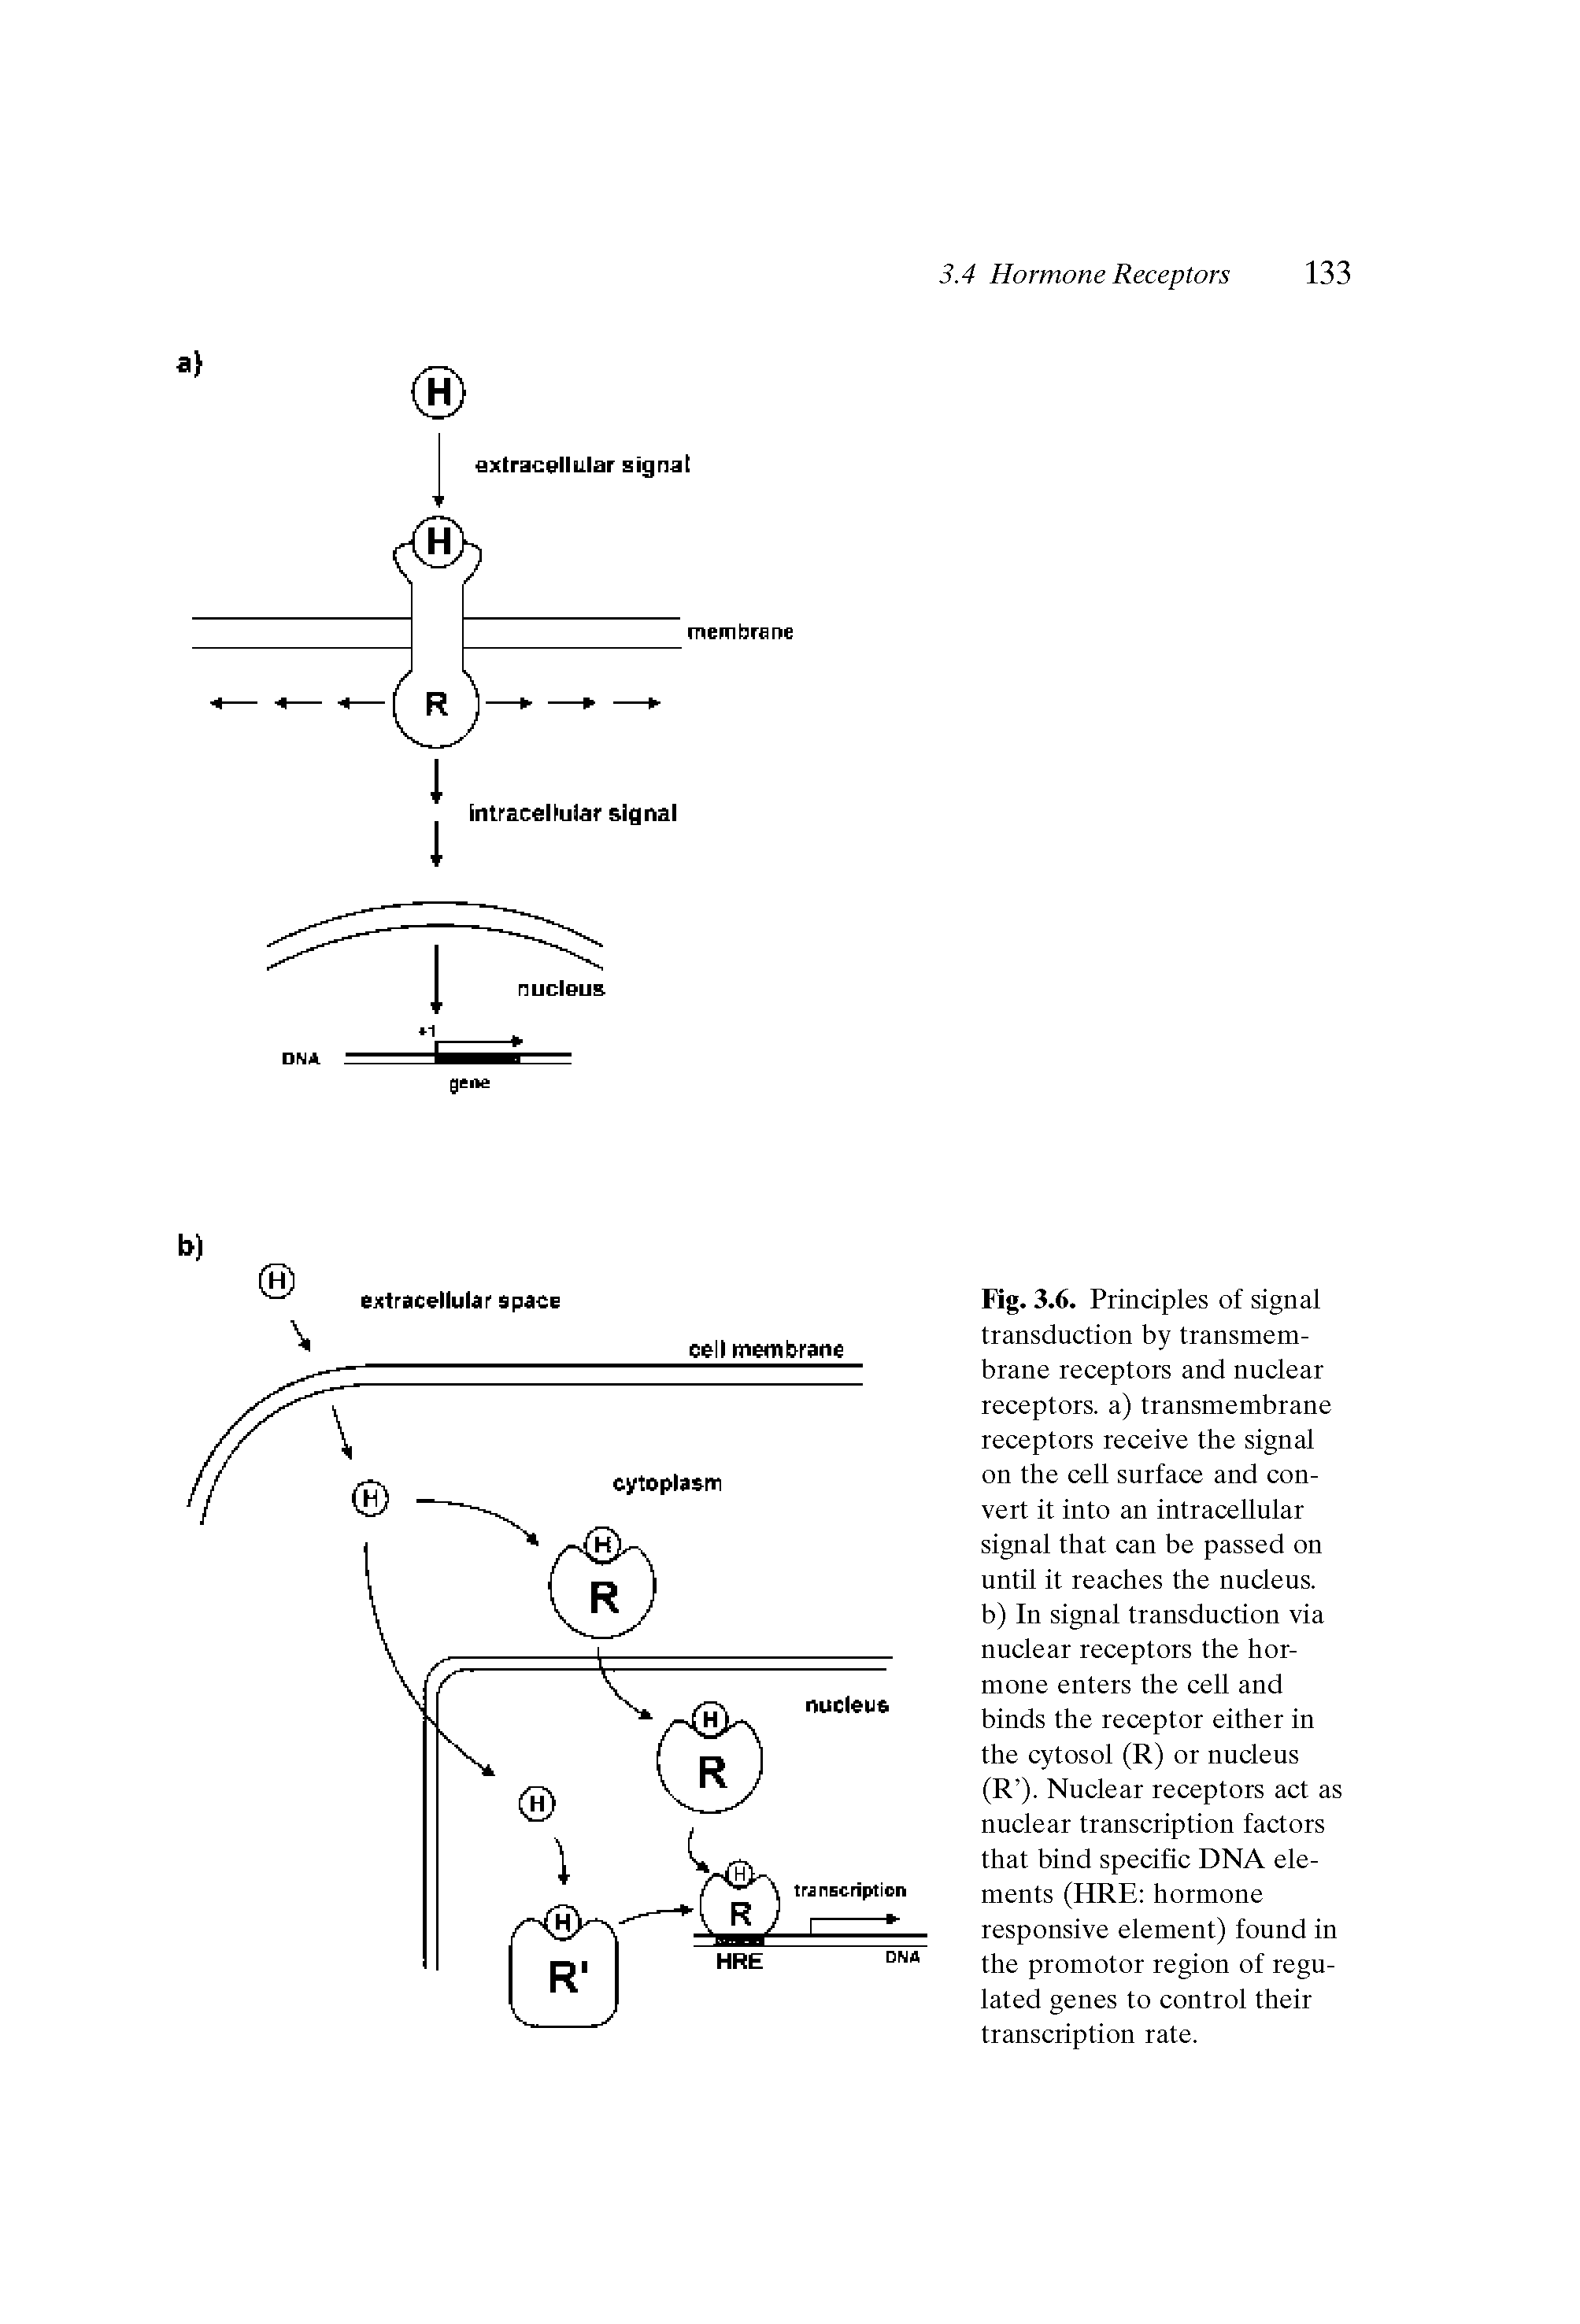 Fig. 3.6. Principles of signal transduction by transmembrane receptors and nuclear receptors, a) transmembrane receptors receive the signal on the cell surface and convert it into an intracellular signal that can be passed on until it reaches the nucleus, b) In signal transduction via nuclear receptors the hormone enters the cell and binds the receptor either in the cytosol (R) or nucleus (R ). Nuclear receptors act as nuclear transcription factors that bind specific DNA elements (HRE hormone responsive element) found in the promotor region of regulated genes to control their transcription rate.